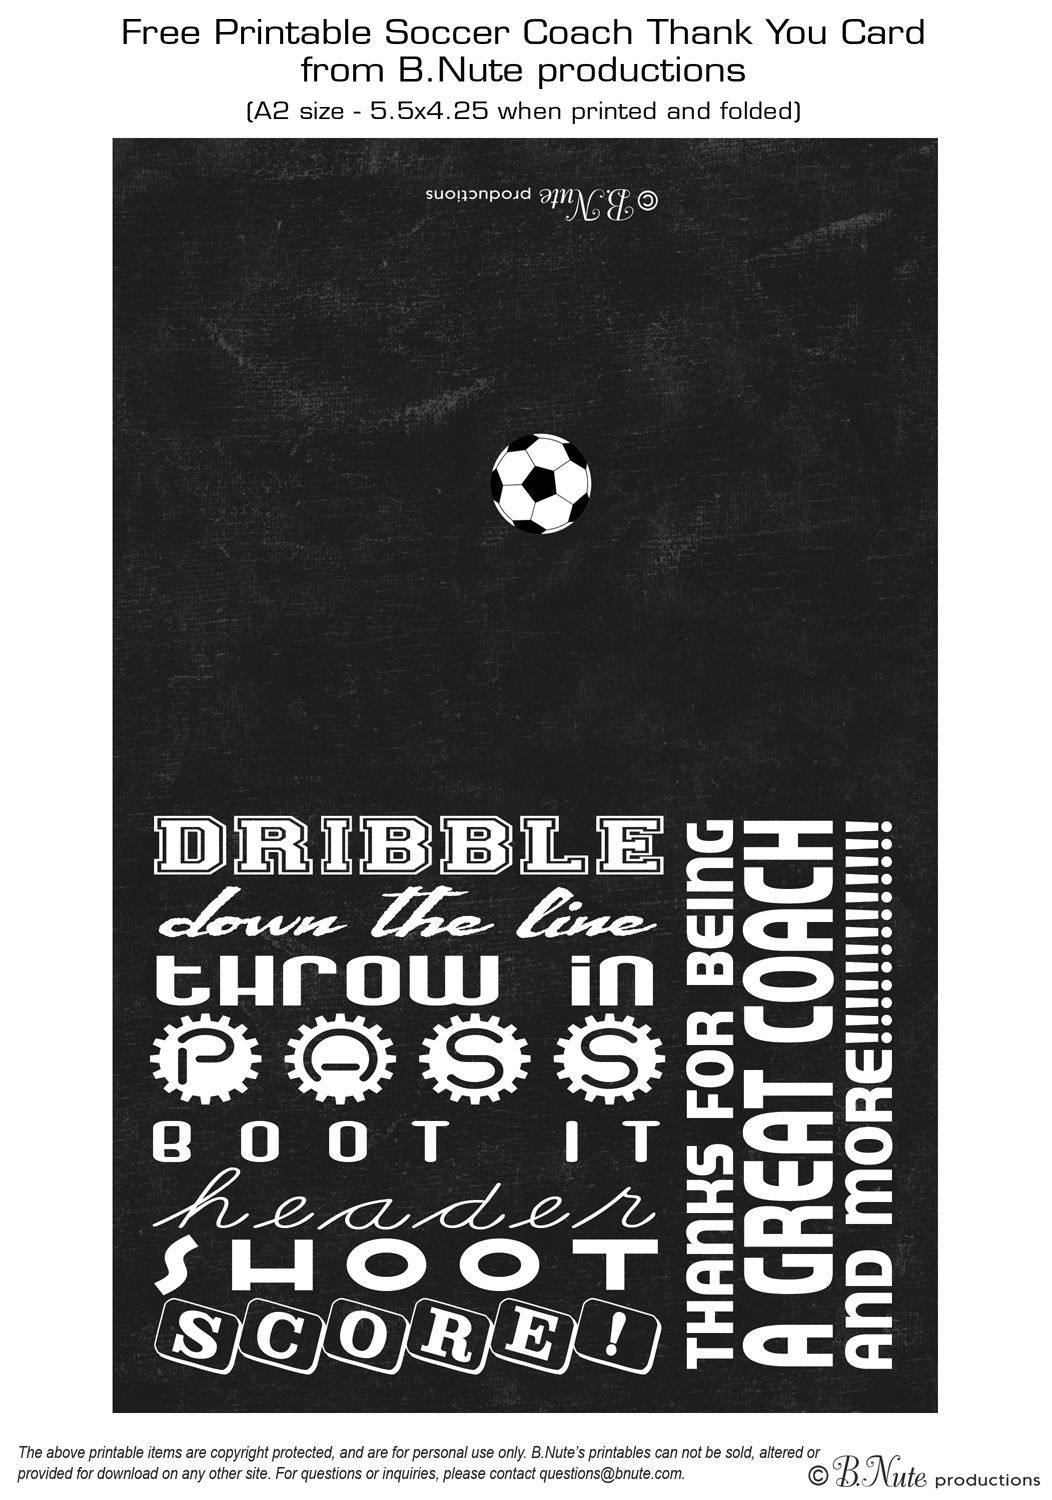 Free Printable Soccer Coach Thank You Card From B.nute Productions - Free Printable Soccer Thank You Cards